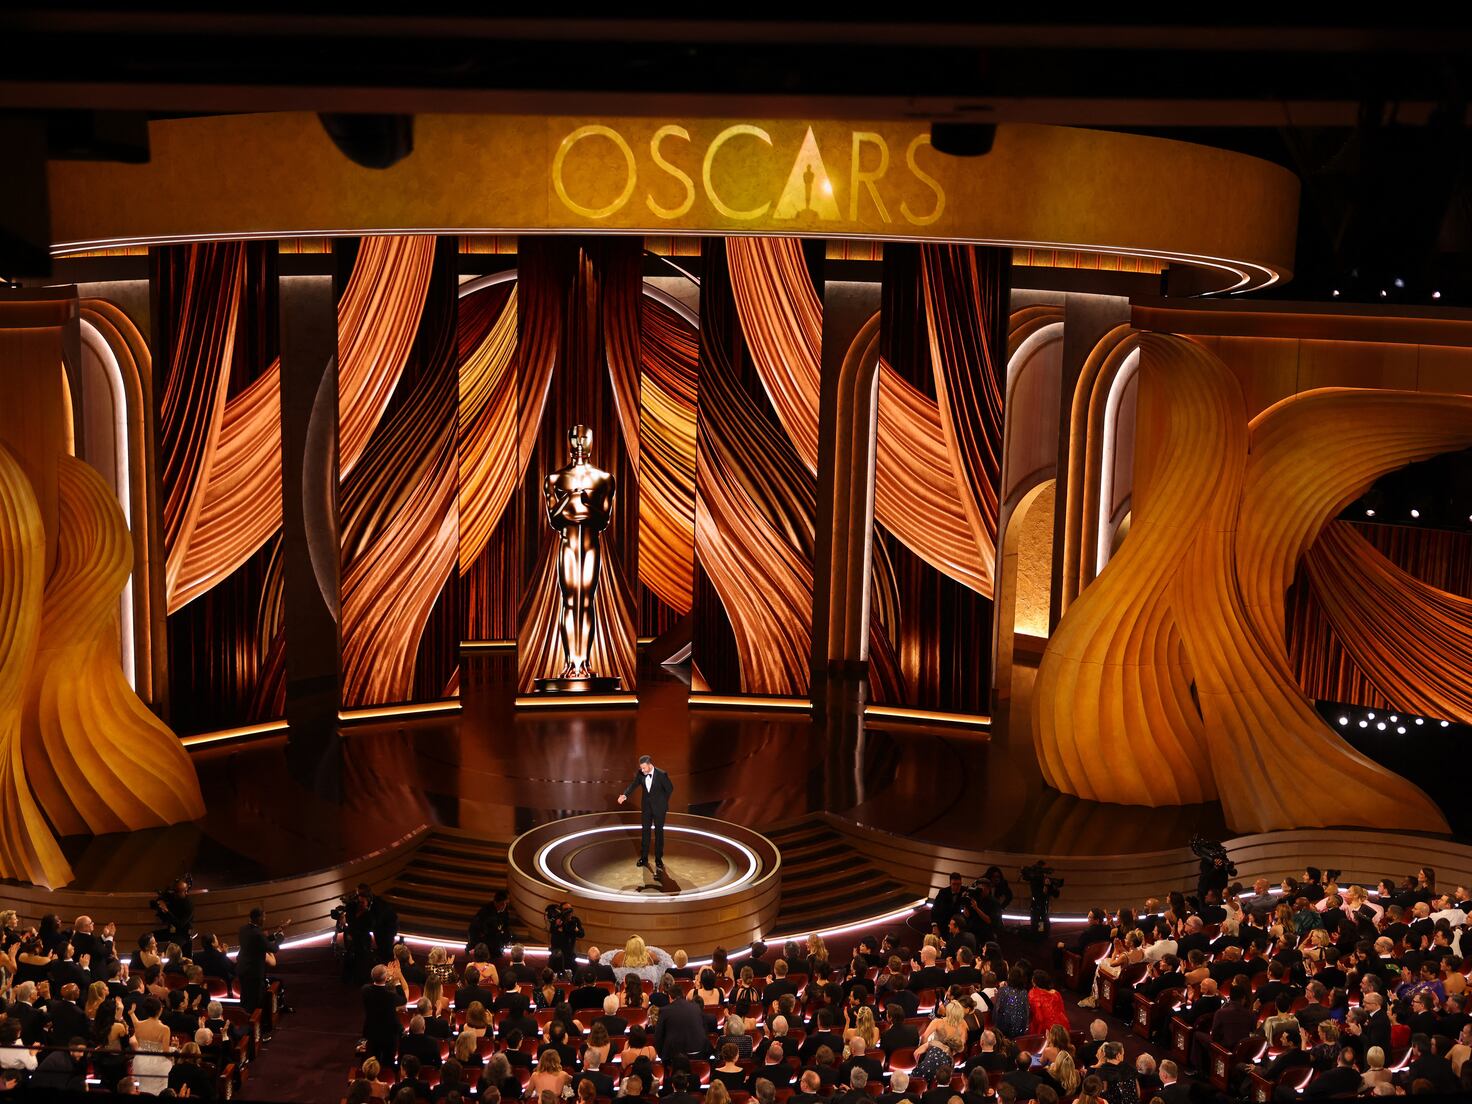 2022 Oscar Ratings: 16.6 Million Viewers, Up 58% From Last Year